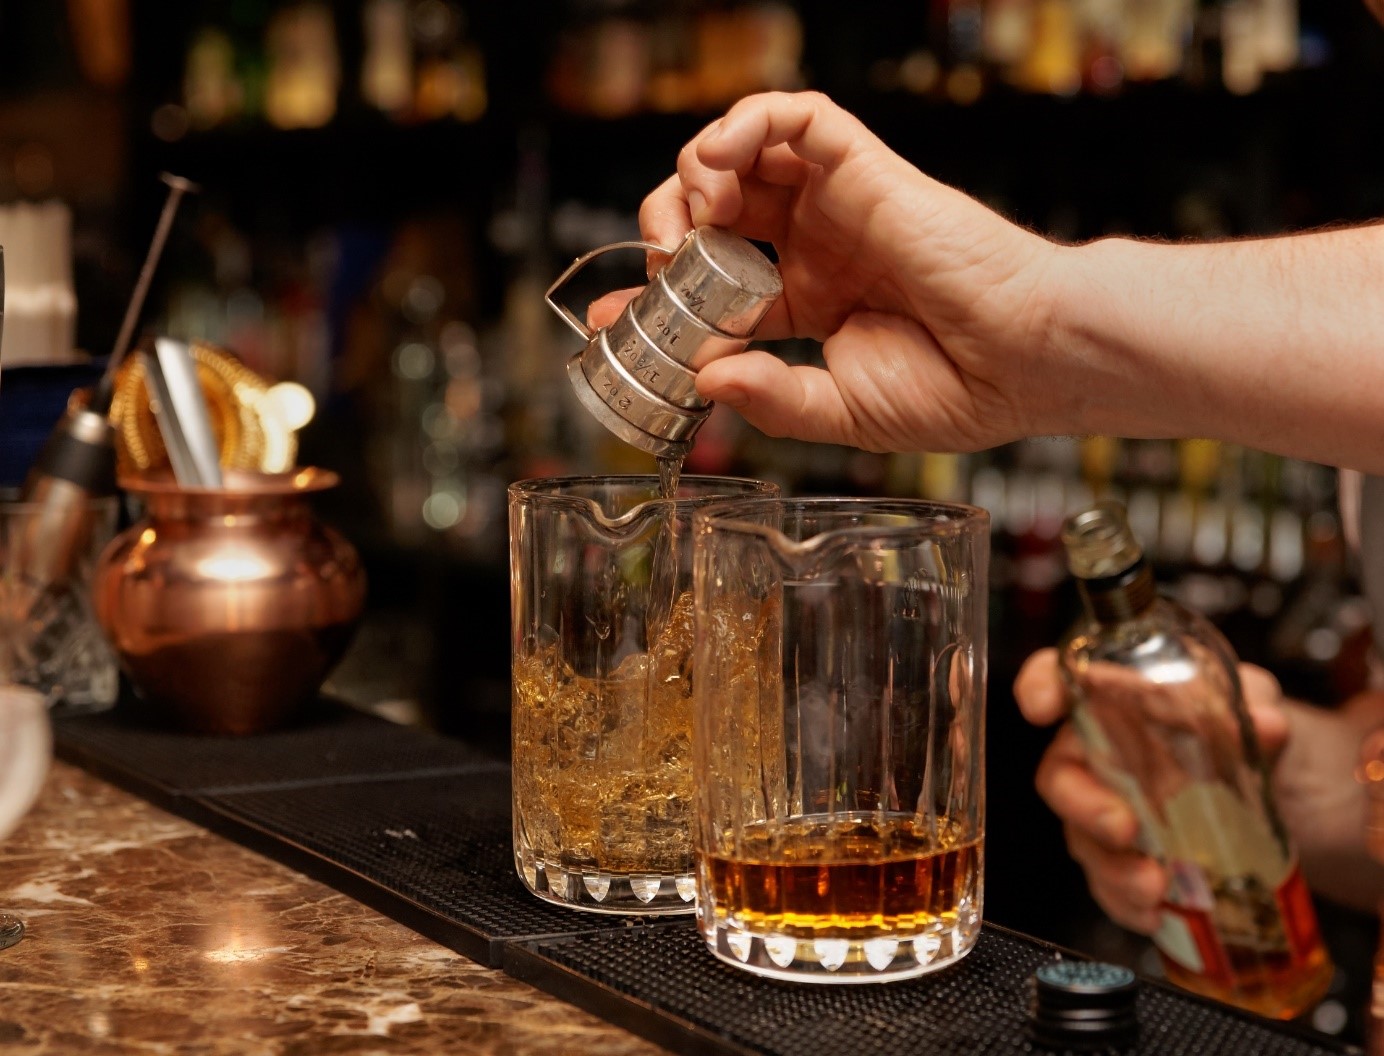 The 5 Essentials You Need for a Quality Home Bar